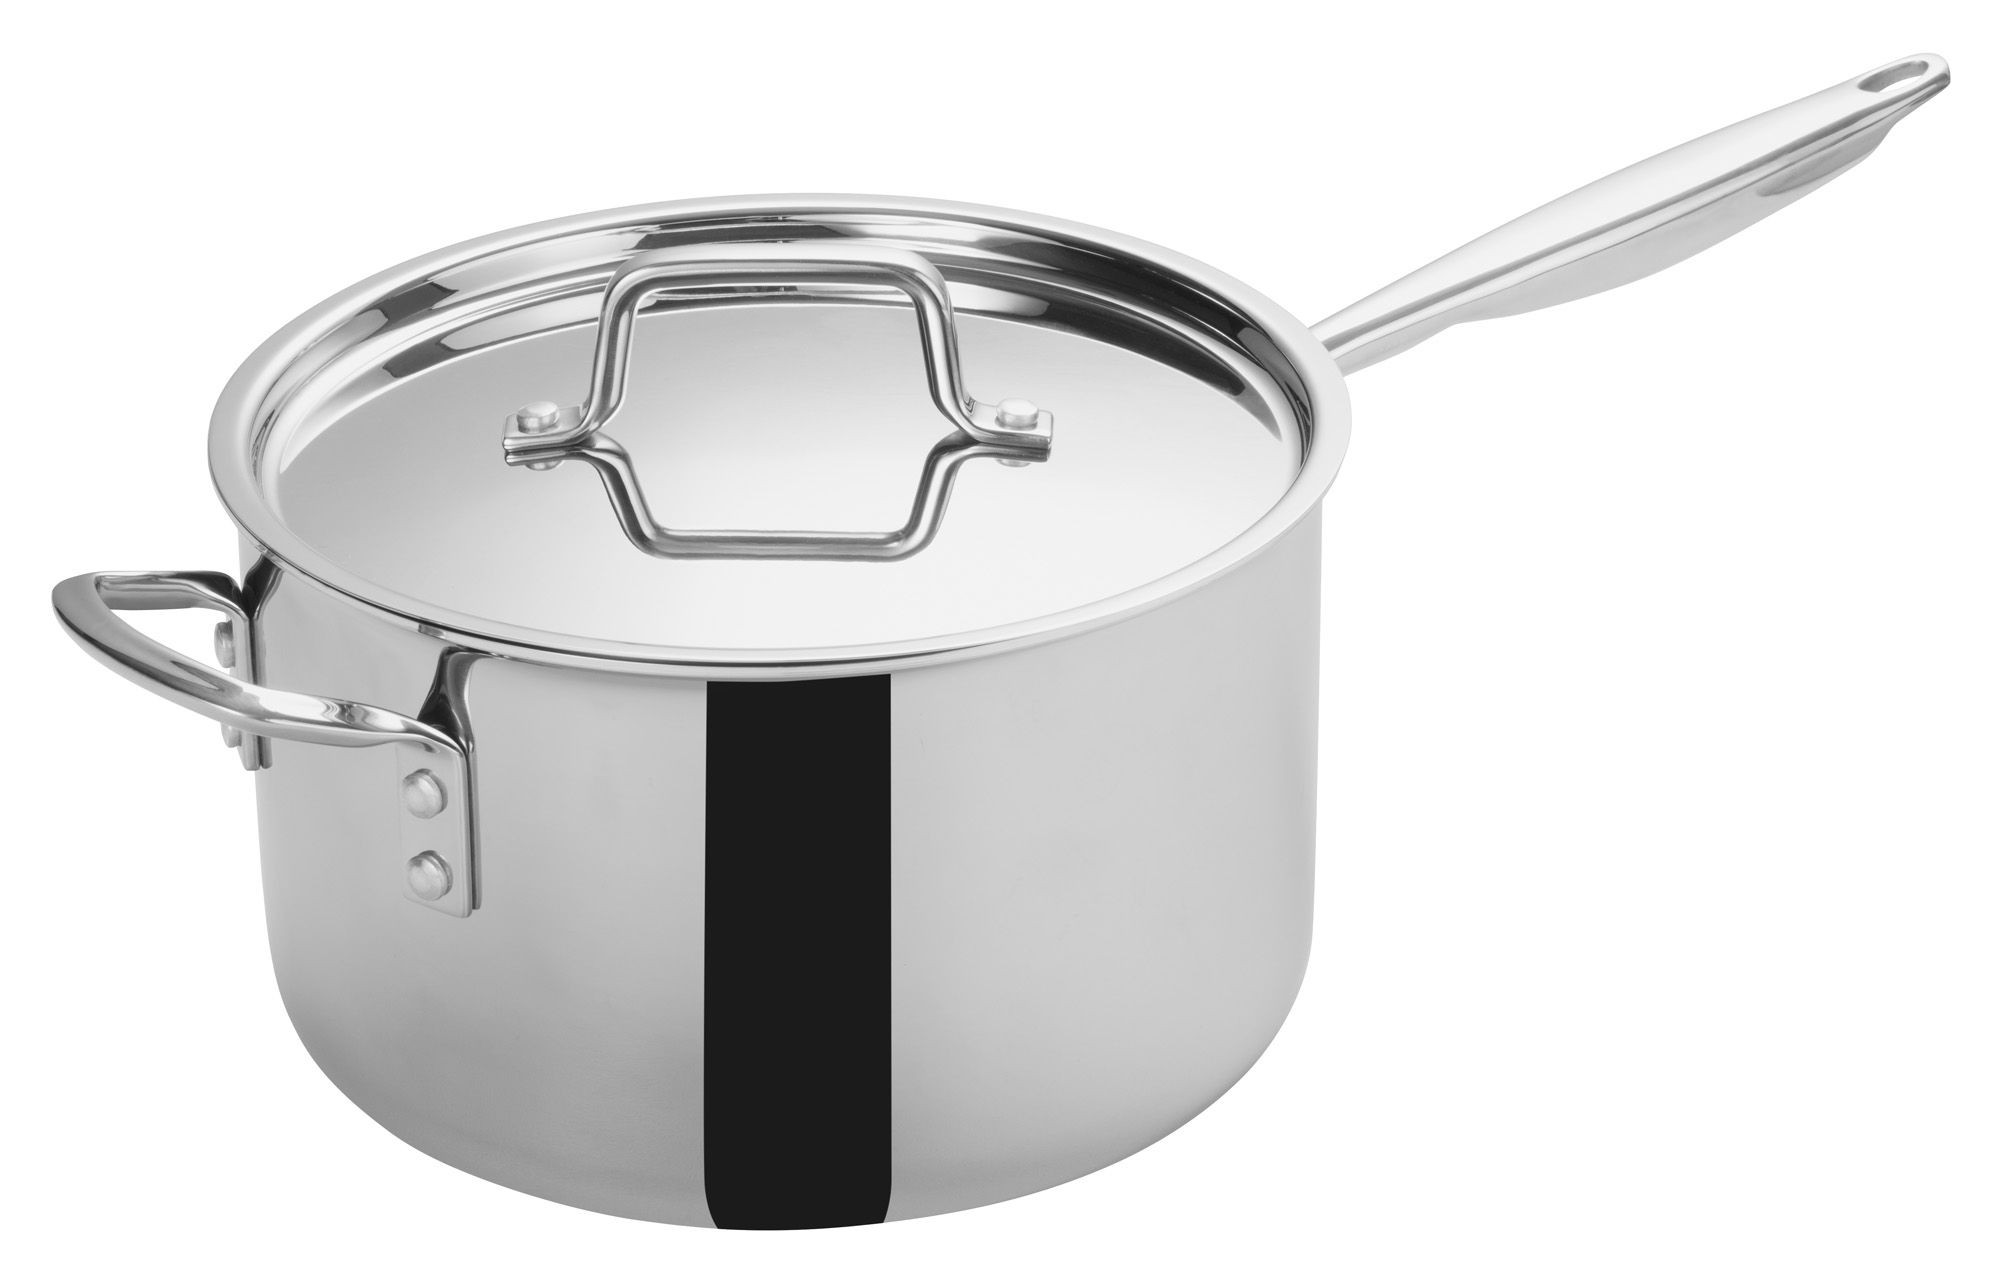 Winco TGAP-7 Tri-Ply Stainless Steel 7 Qt. Sauce Pan with Cover